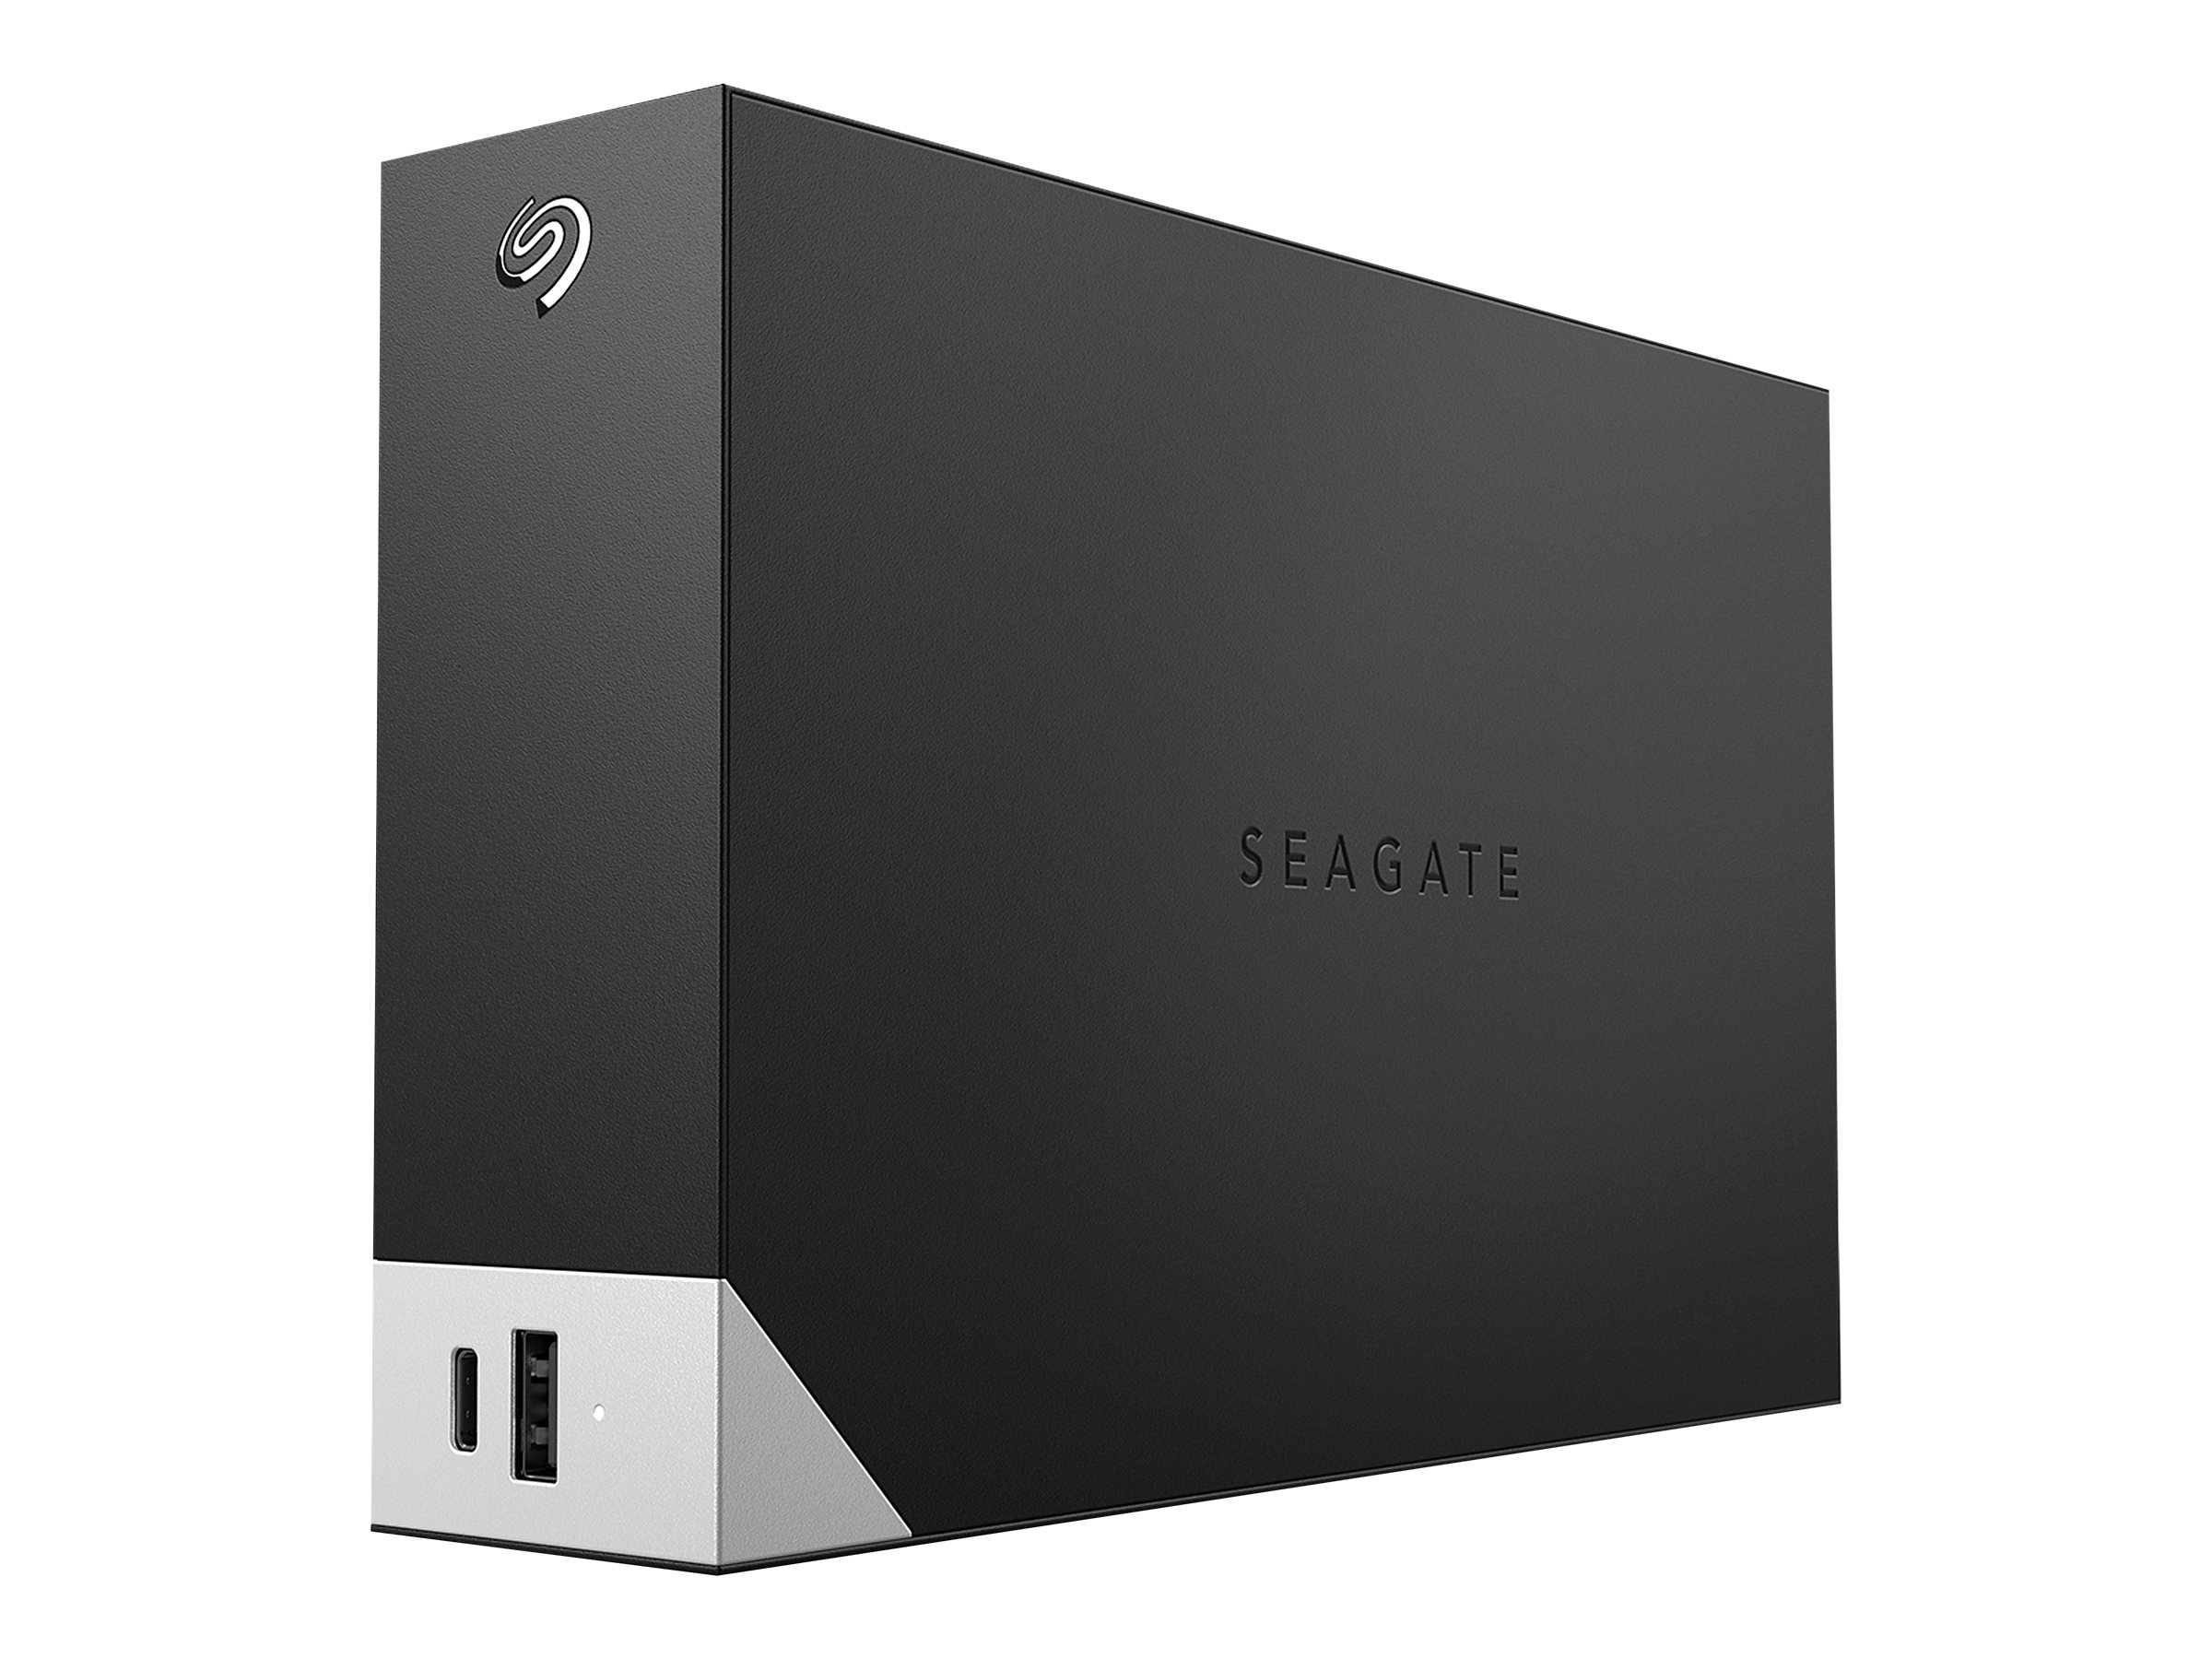 SEAGATE ONE TOUCH DESKTOP WITH HUB (STLC10000400)